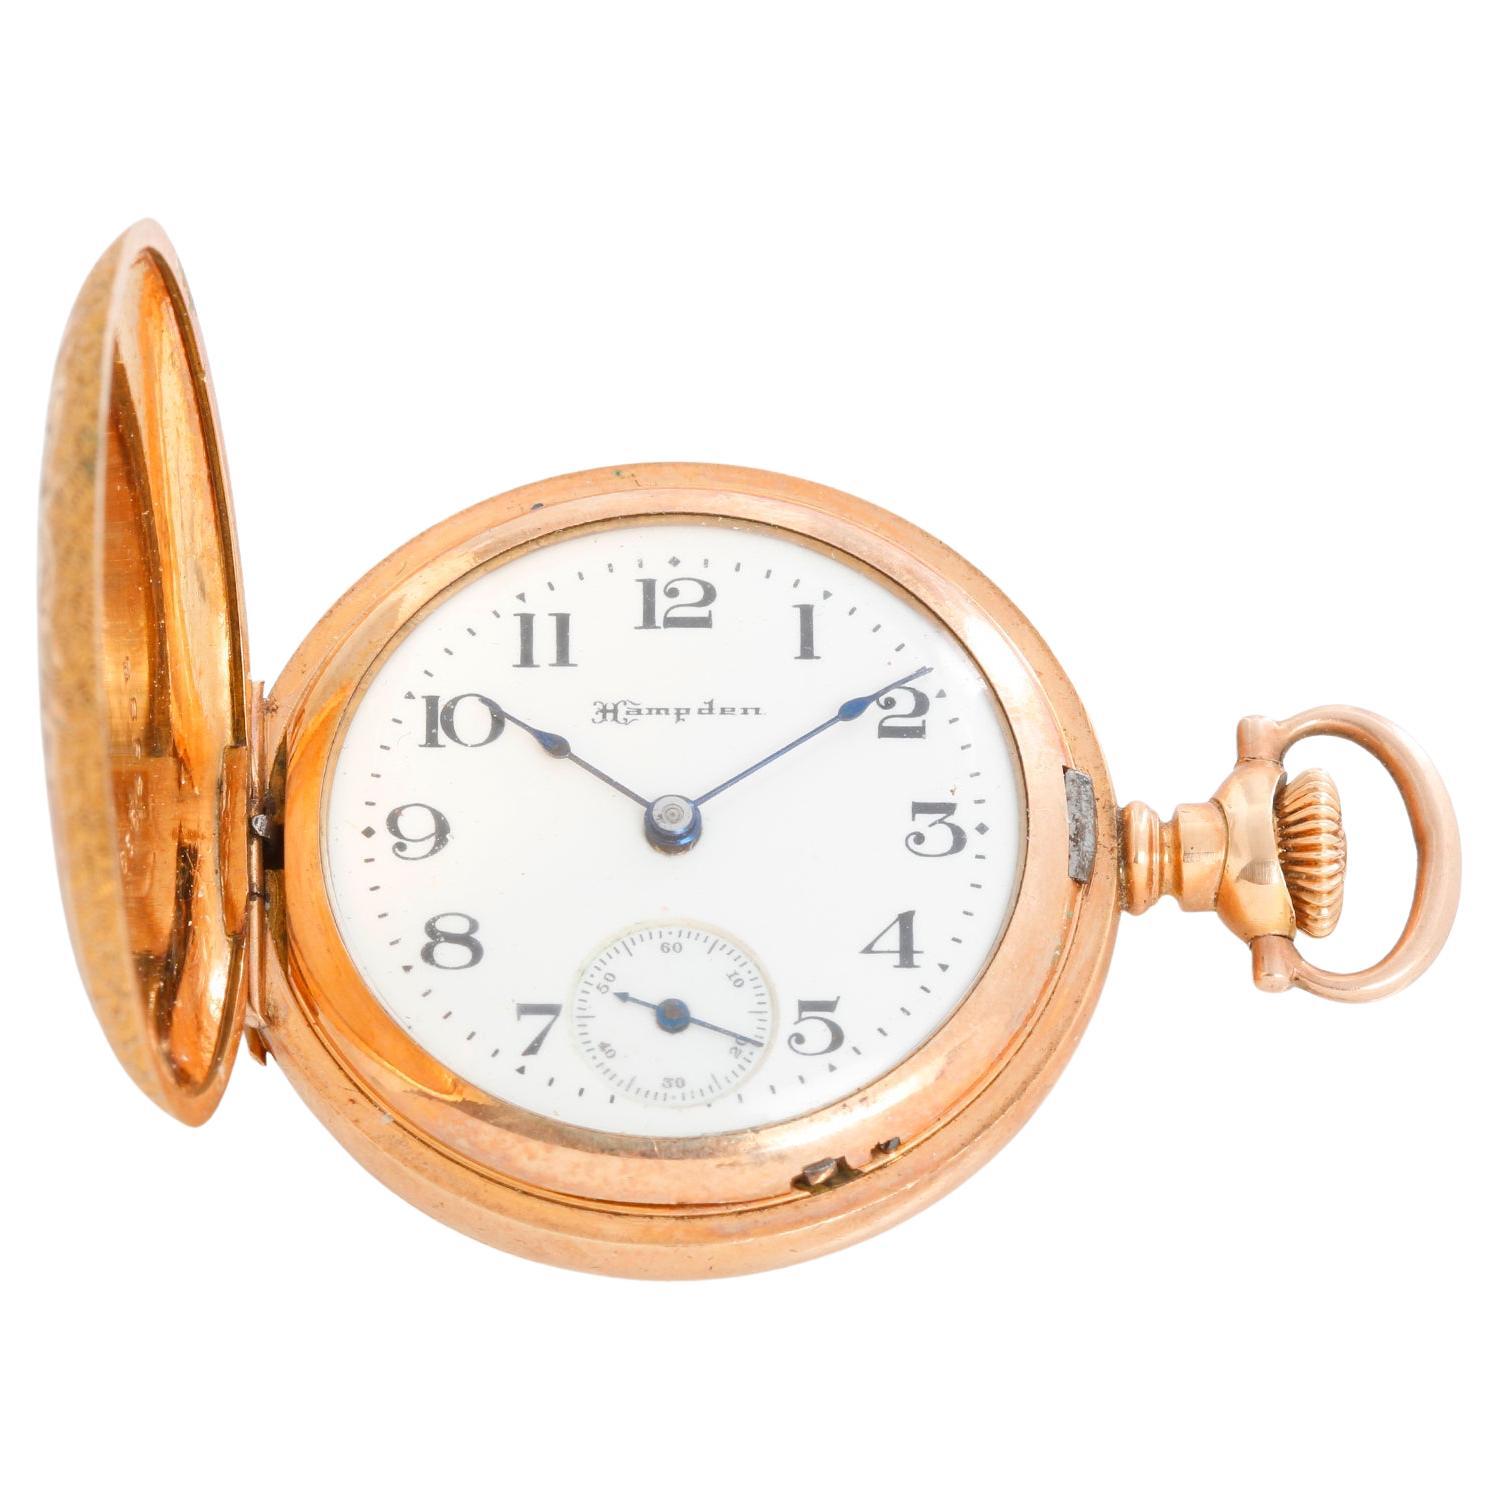 Jewellery Watches Watch Necklaces Vintage Elgin Gold-Plated Manual Wind Ladies Pendant Watch 